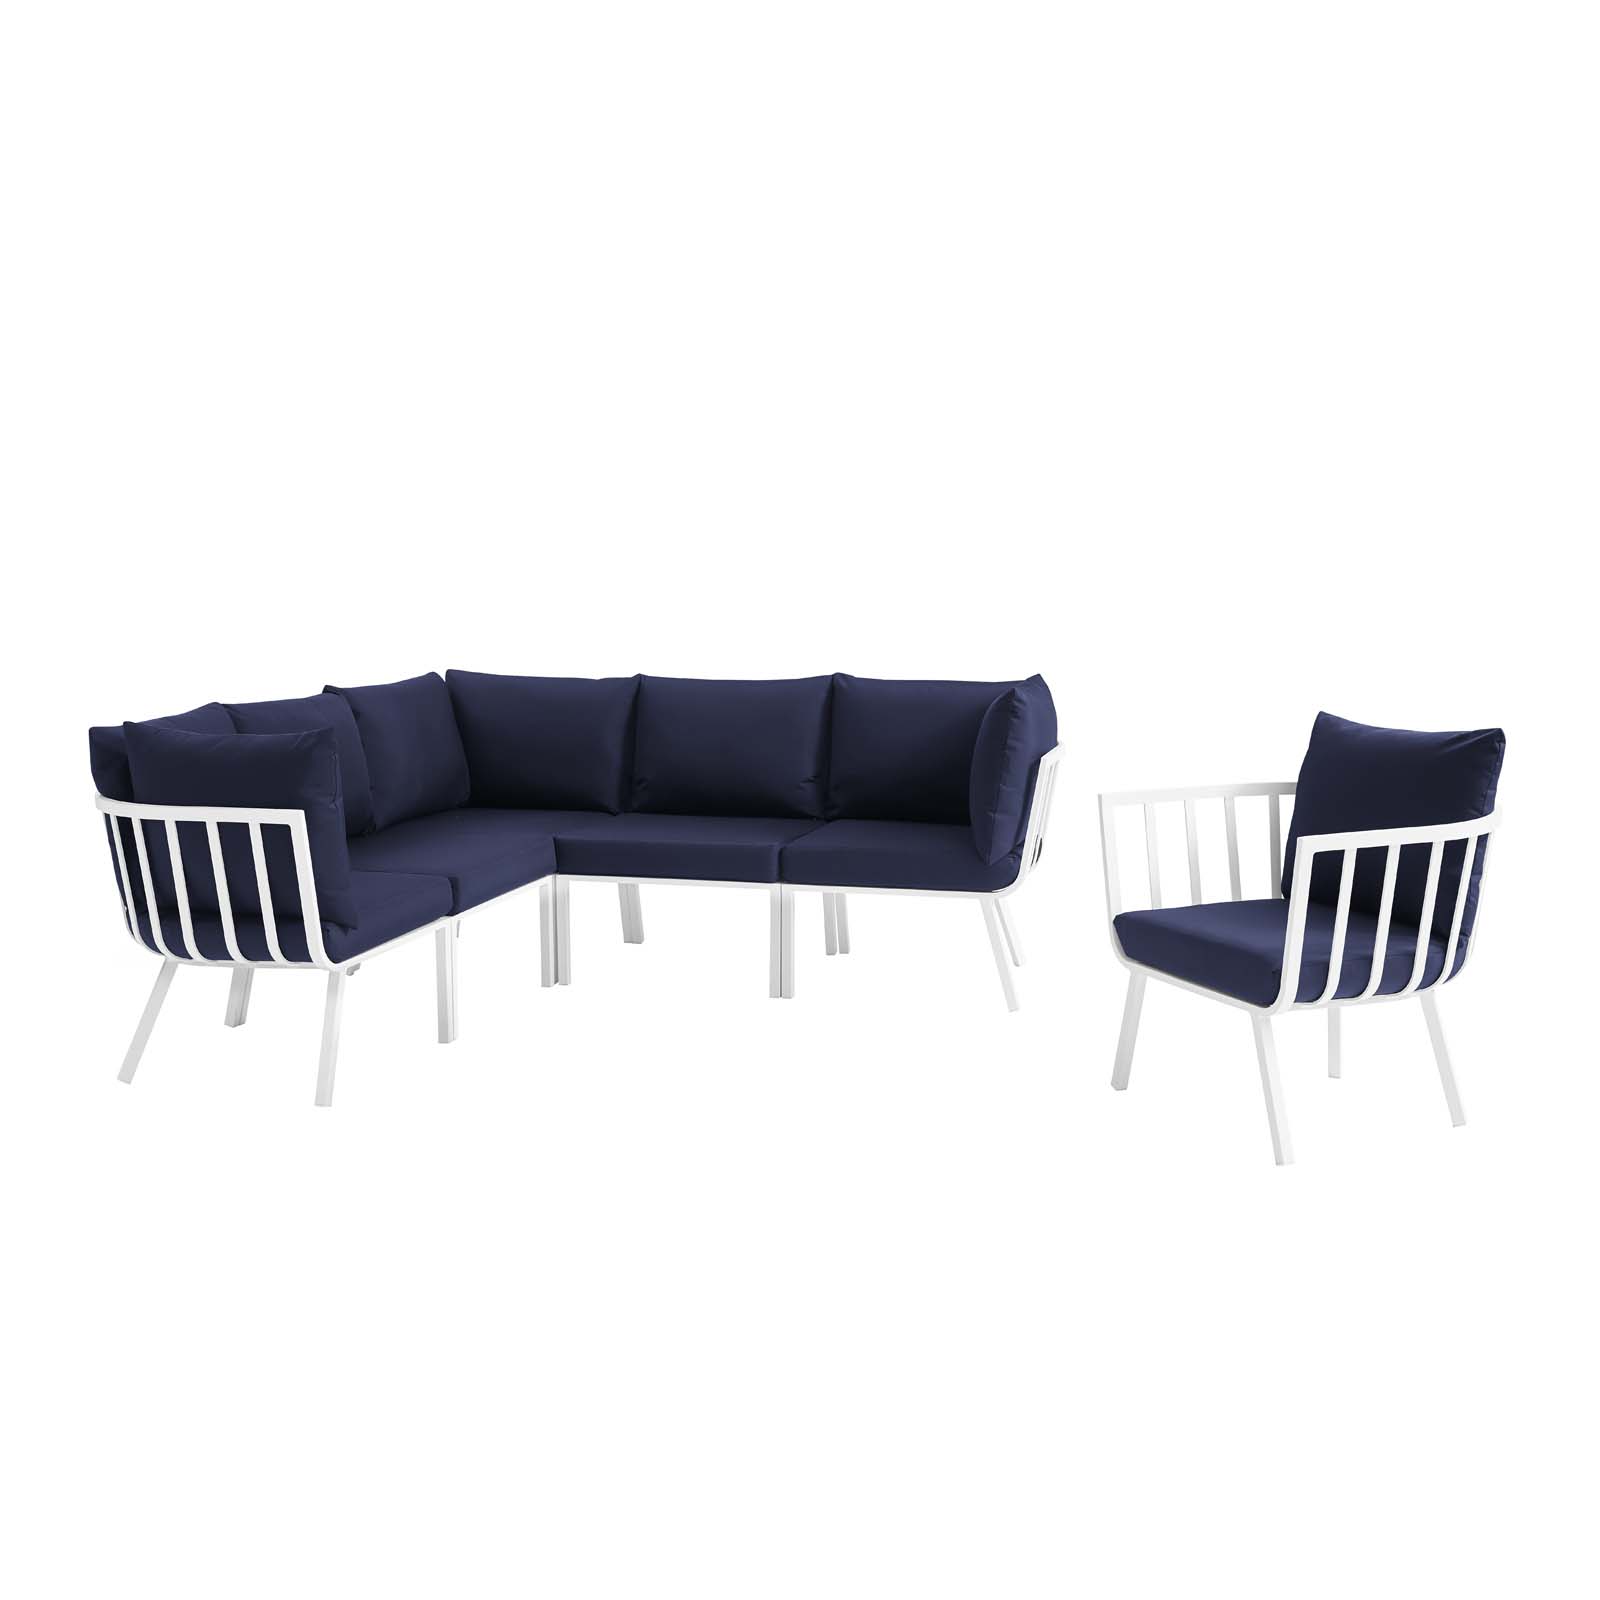 Modway Riverside 6 Piece Outdoor Patio Aluminum Set in White Navy - image 2 of 10